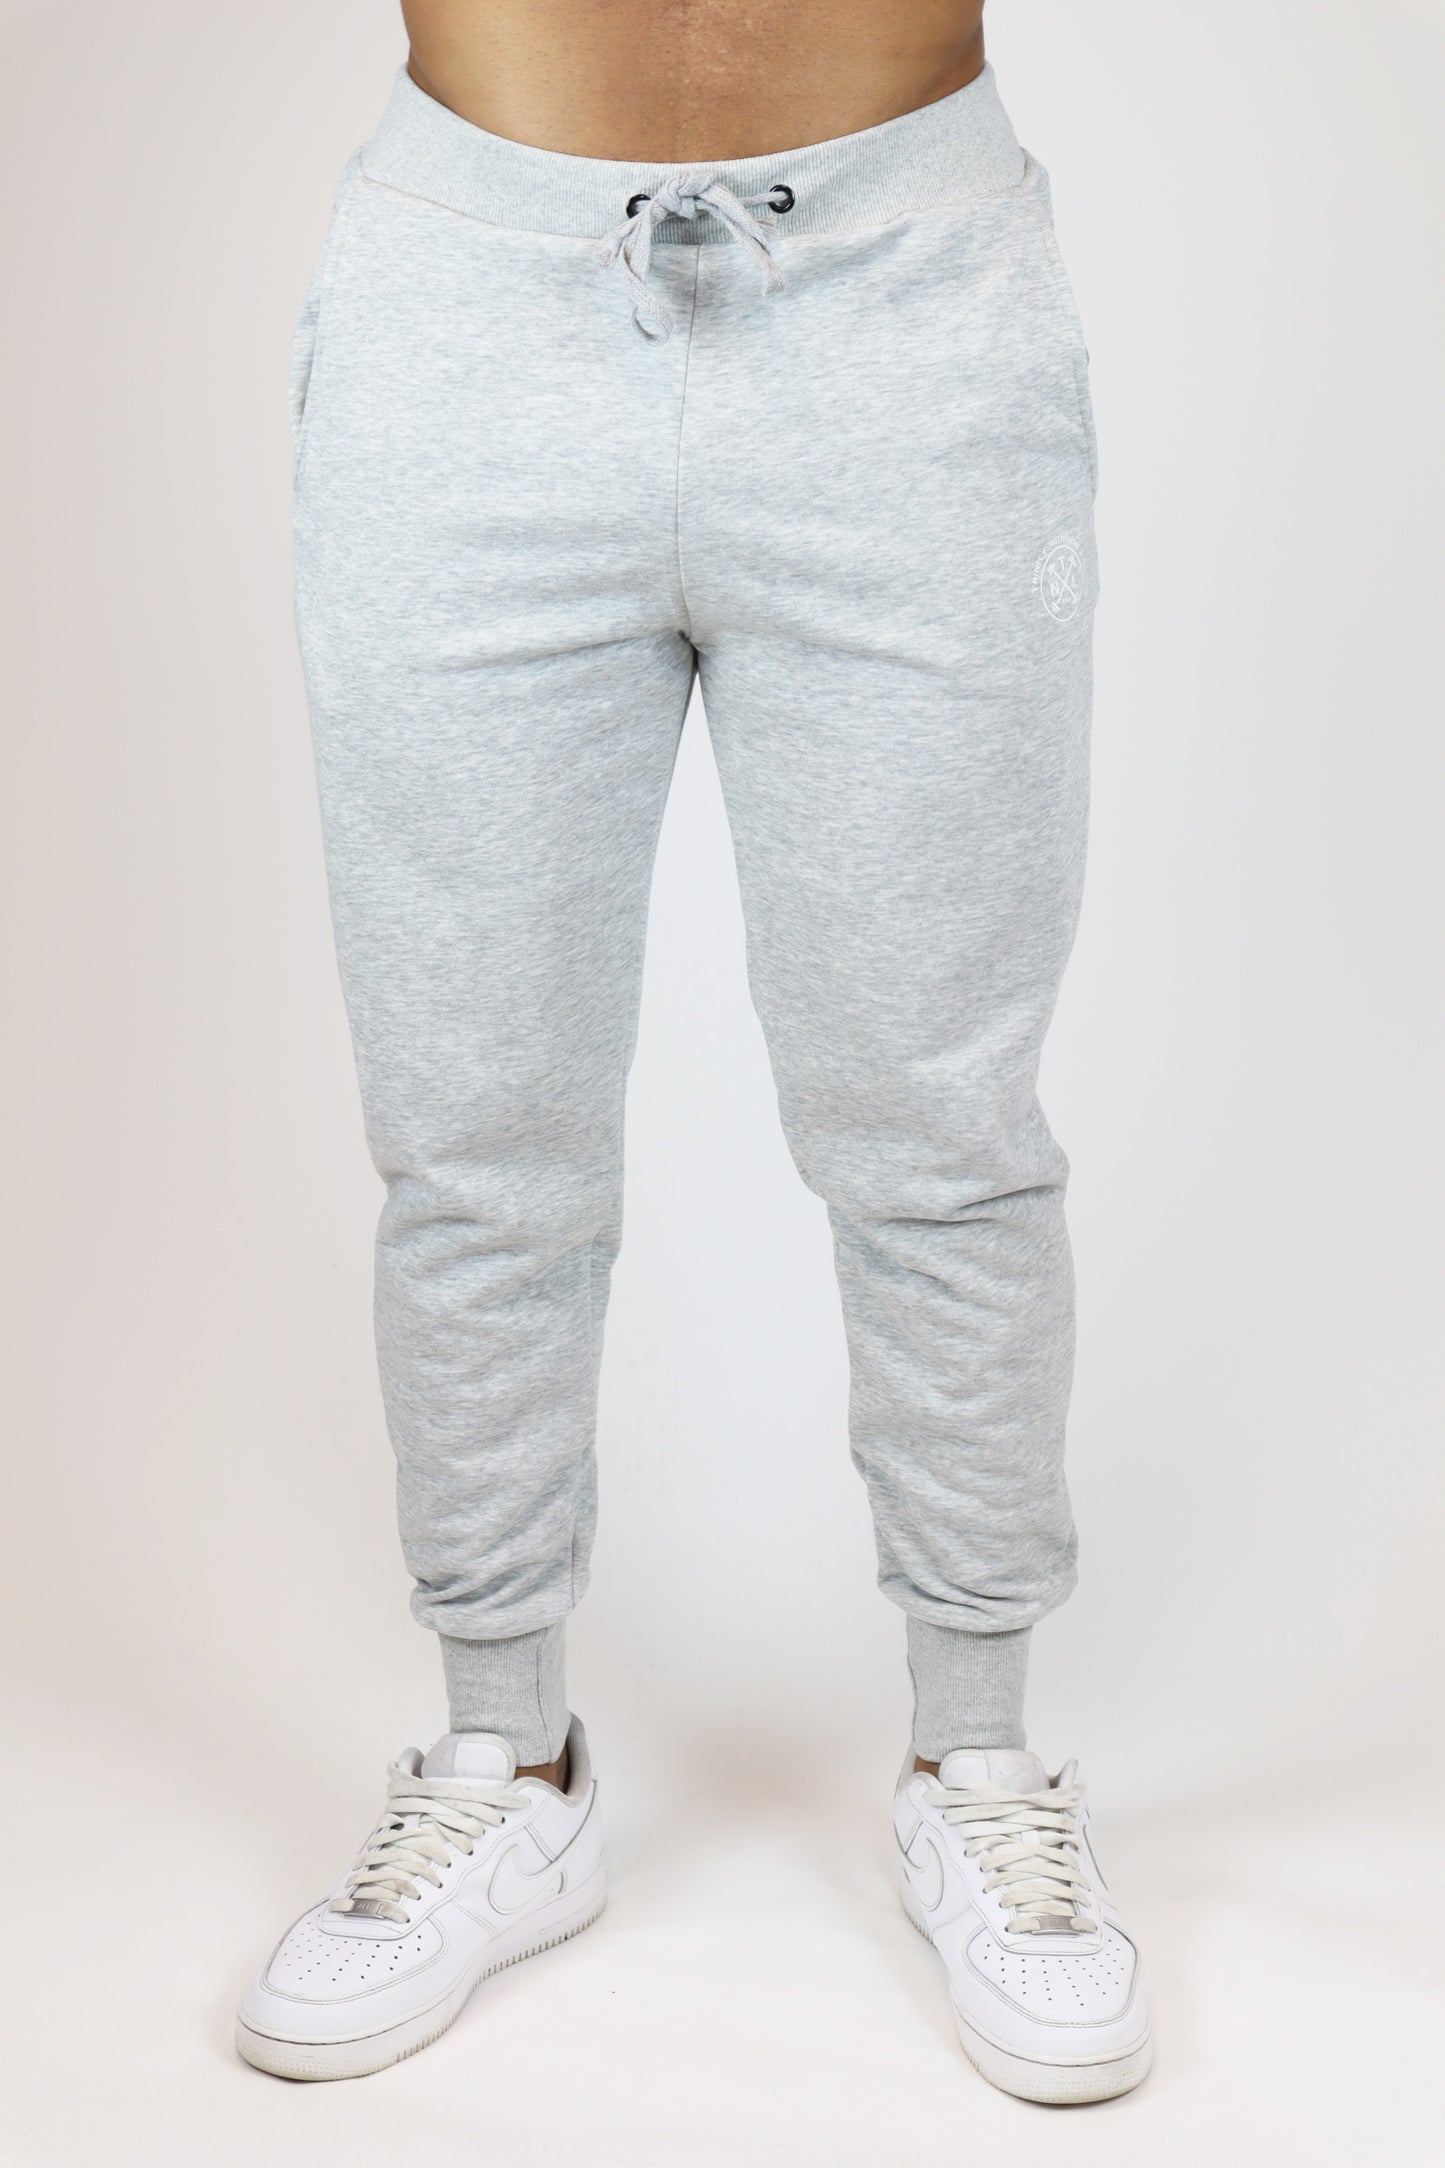 Most comfortable joggers for the gym